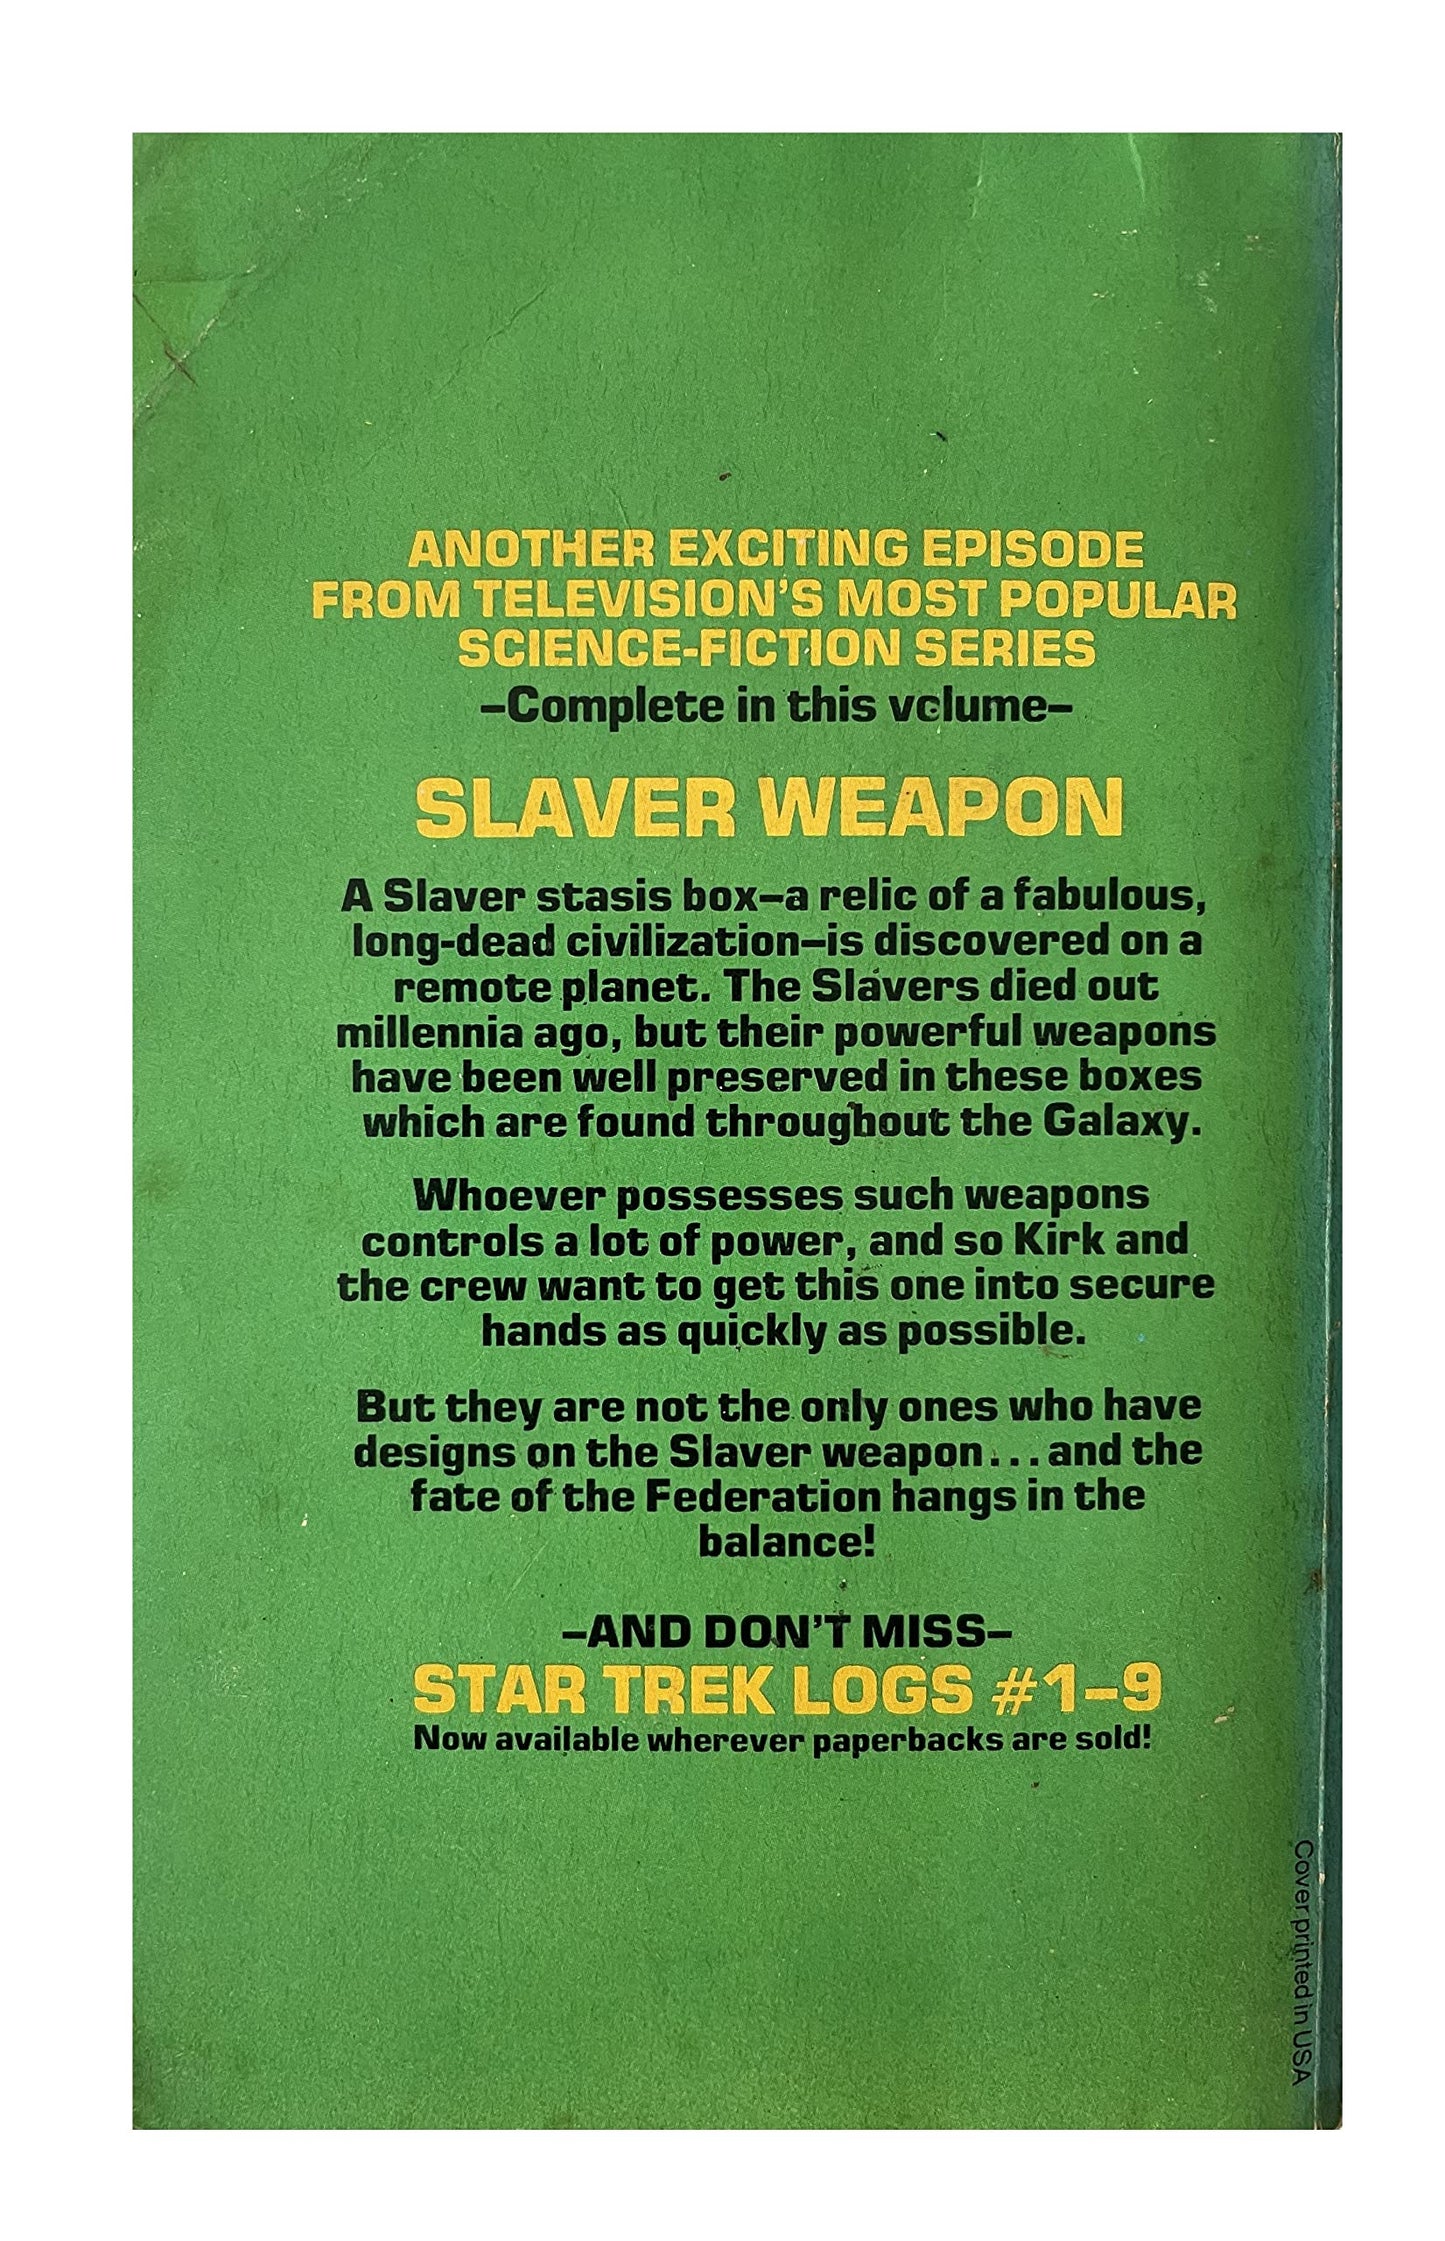 Vintage 1978 Star Trek Log Ten - Adapted From The Animated TV Series - Paperback Book First Edition - By Alan Dean Foster